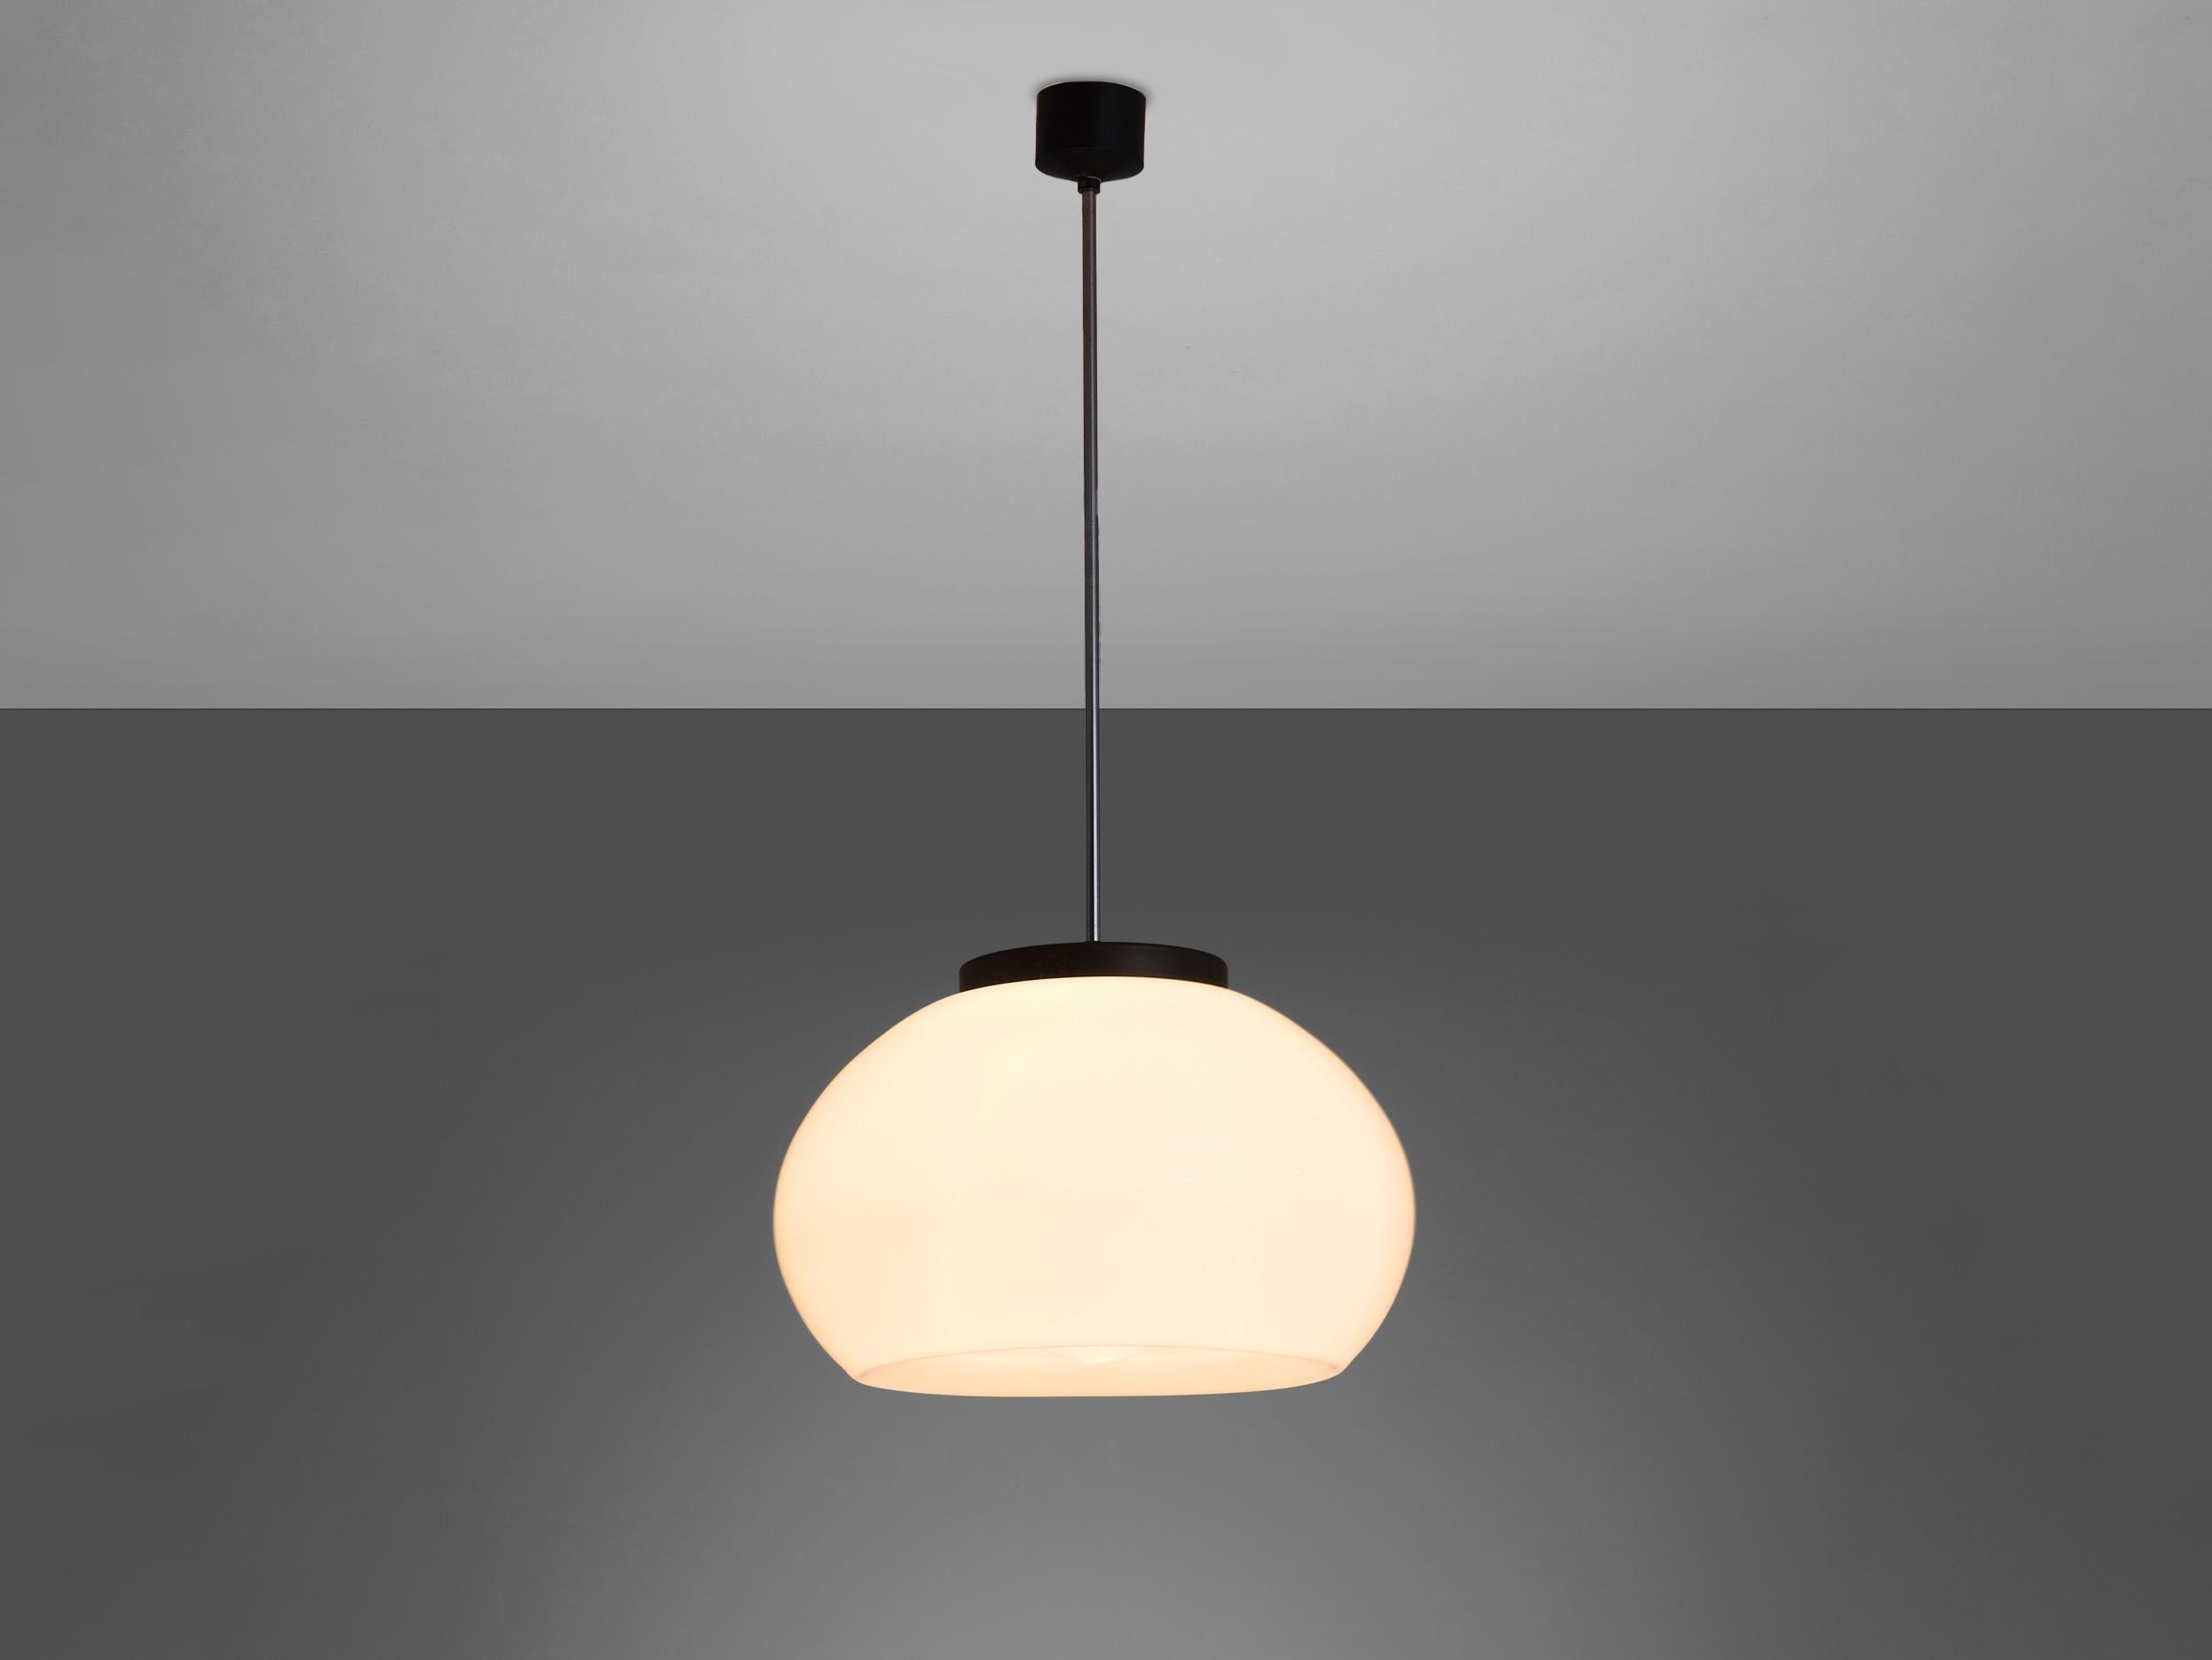 Pendants, glass, metal, Europe, 1970s.

This simple, round shape is very streamlined and organically shaped. The pendants are typically midcentury modern. The glass absorbs the light in a sophisticated way creating a wonderful, atmospheric light